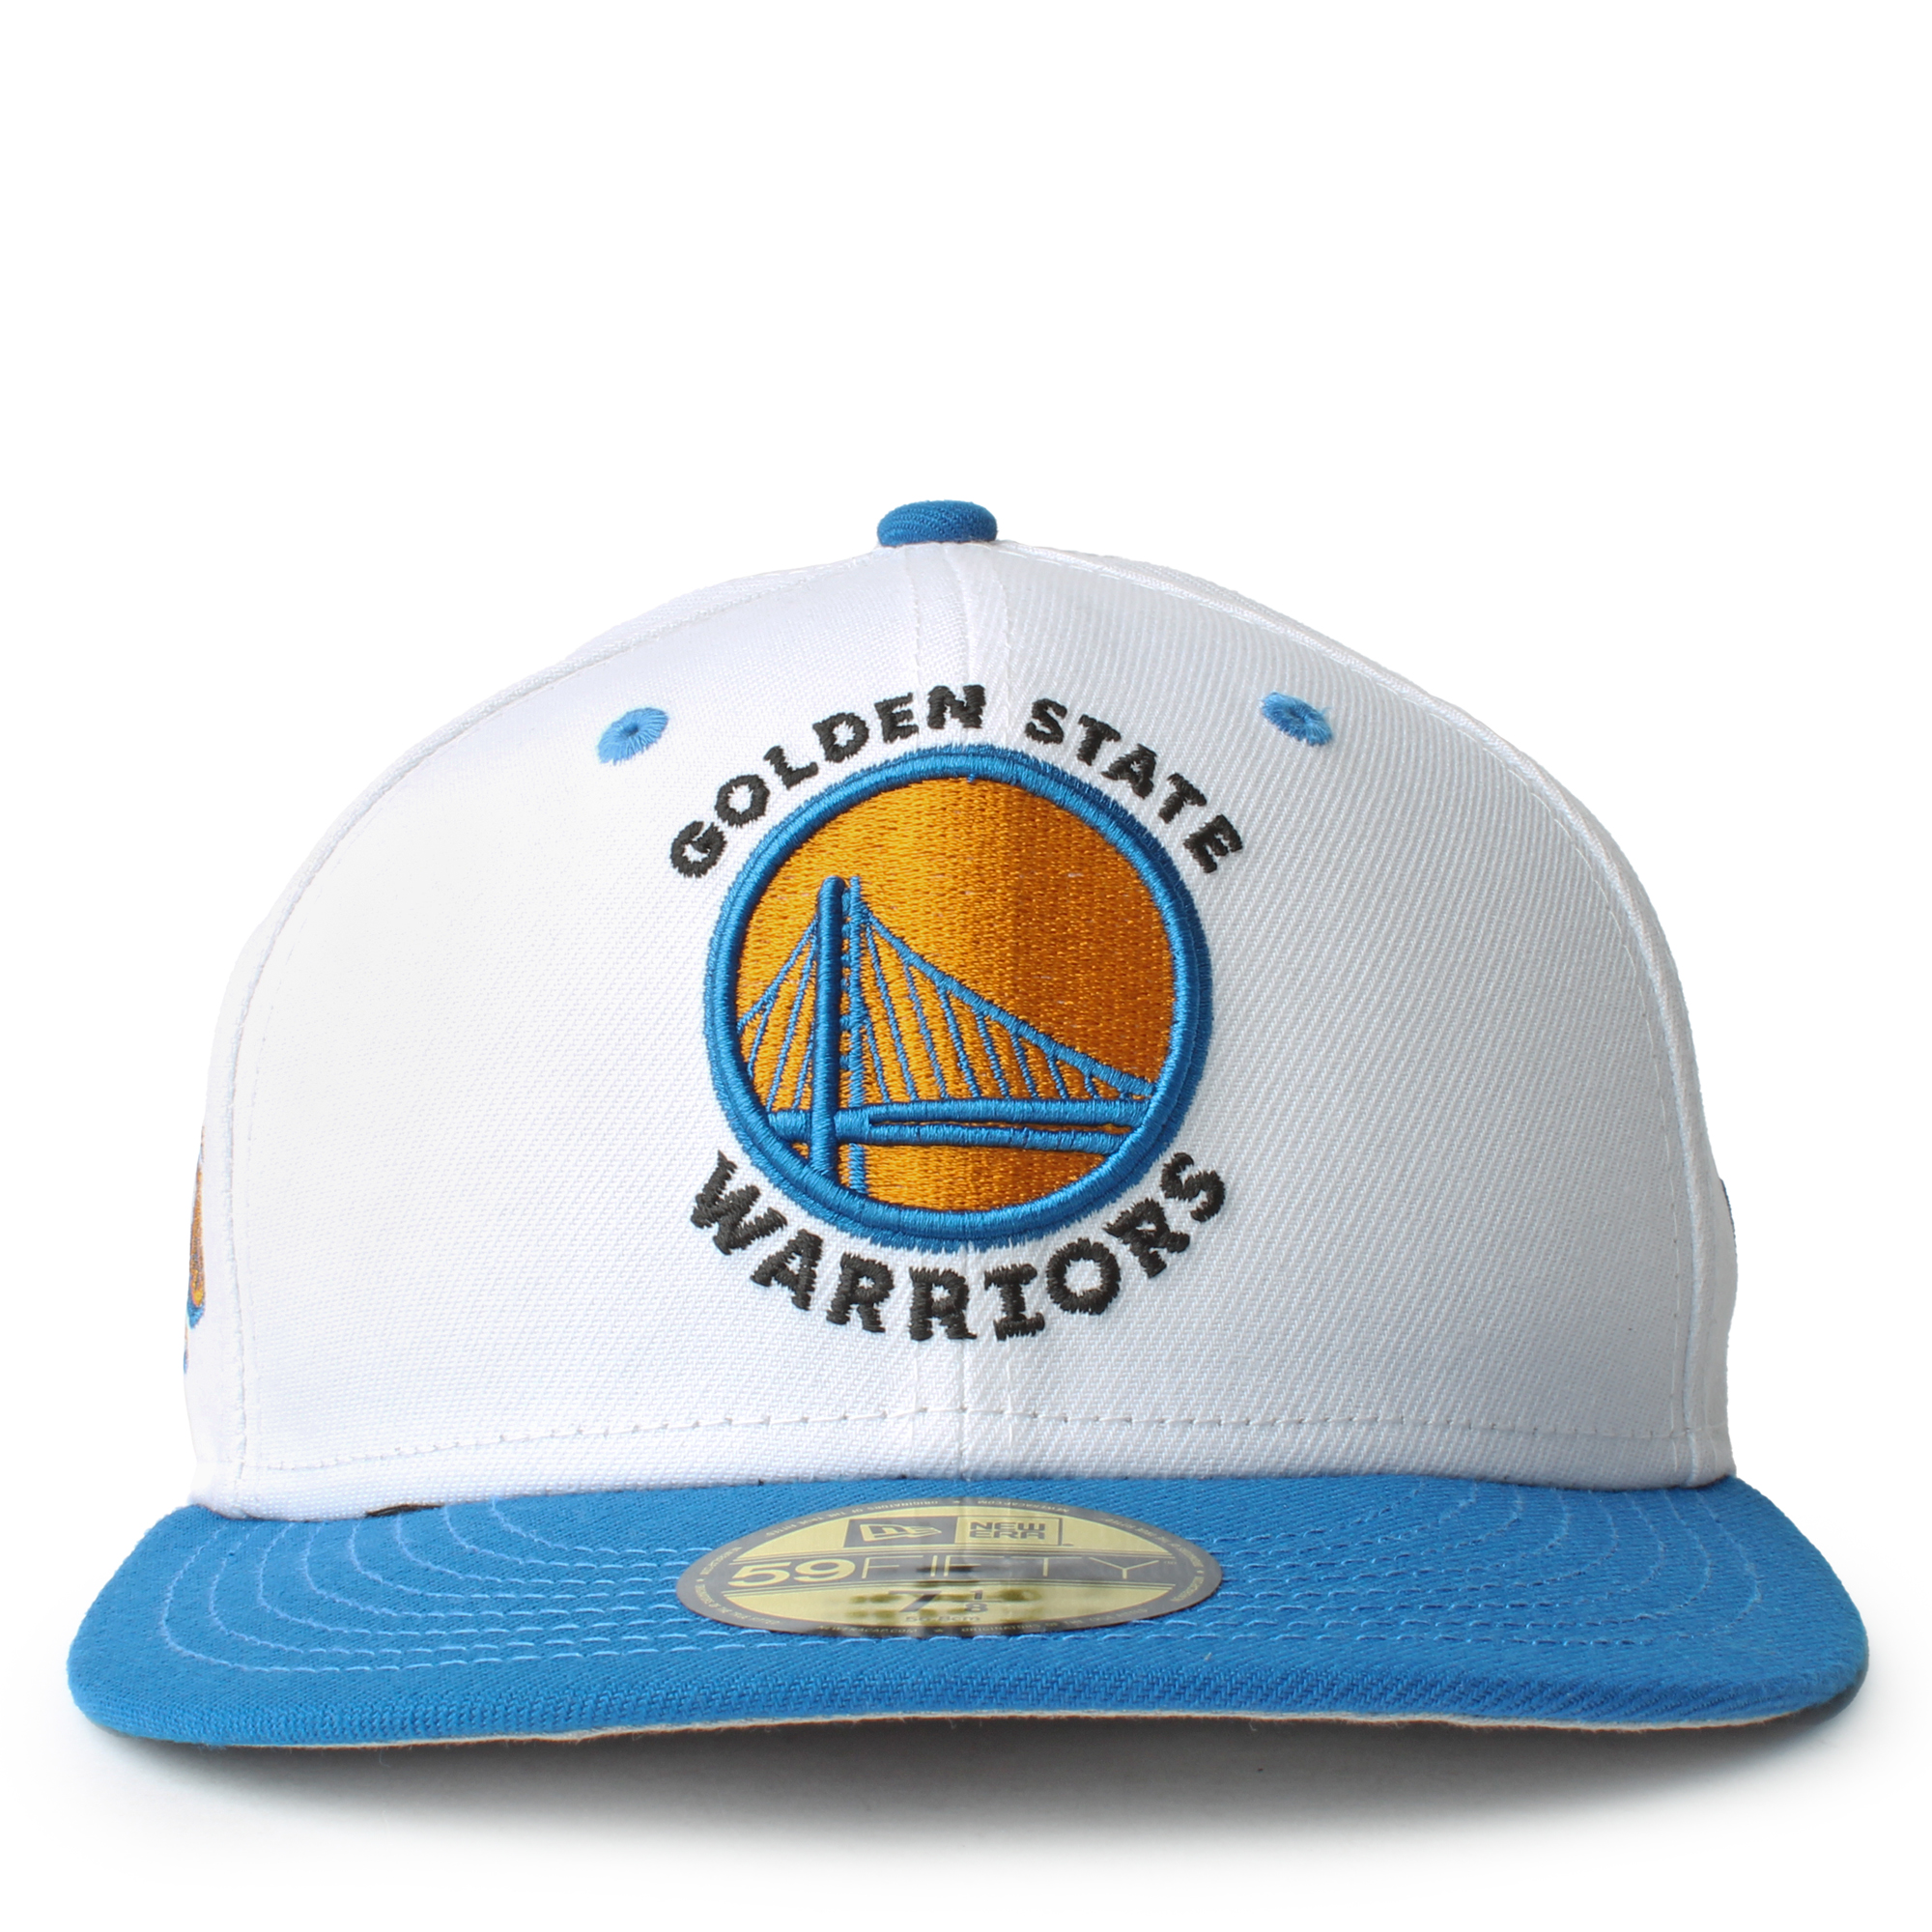 NEW! Golden State Warriors Mitchell & Ness Fitted Hat Heather Grey Size 7  1/8 